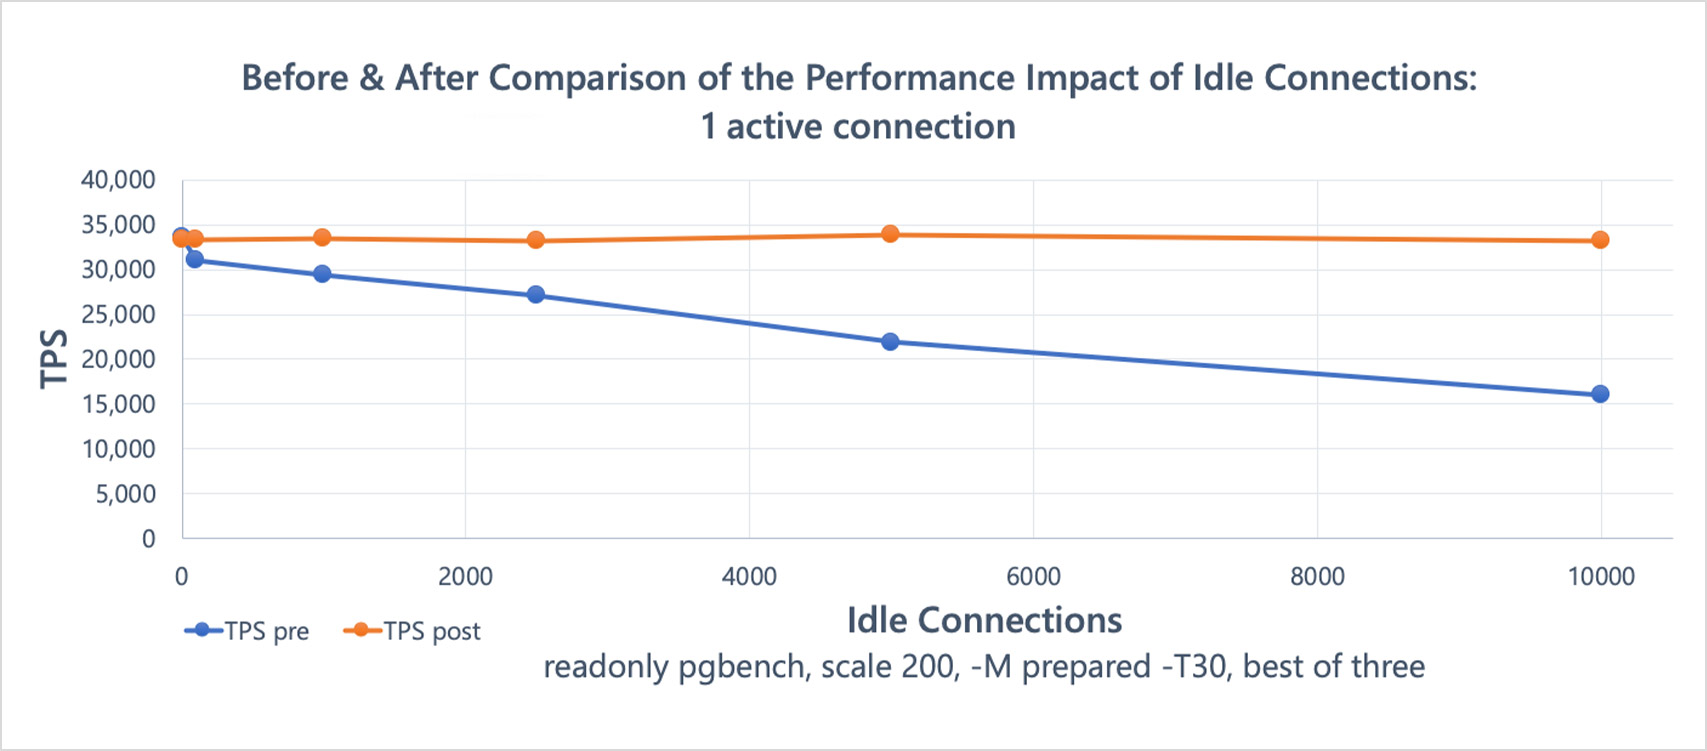 A graph showing significant performance degradation at higher idle connection counts before the changes, but not after the changes.